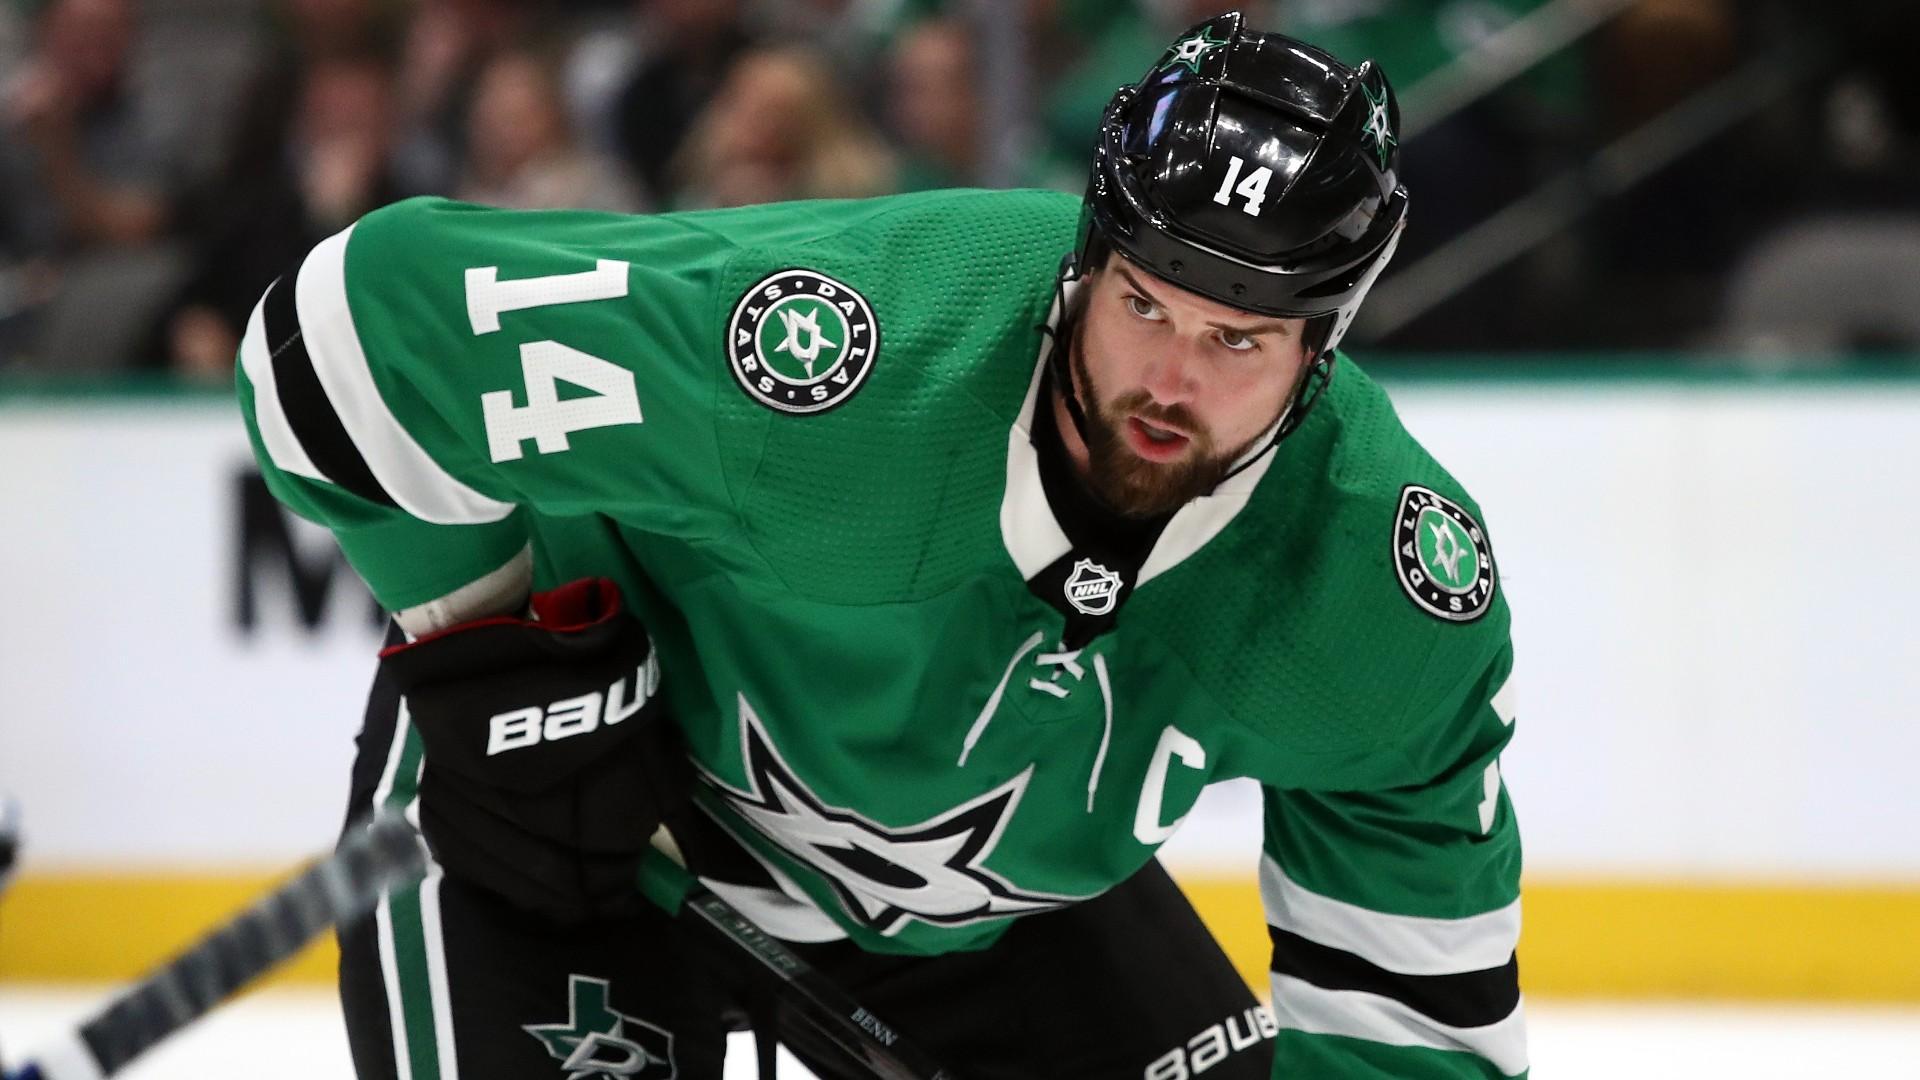 Avalanche vs Stars NHL Game 1 Predictions, Odds, & Best Bets (5/7)